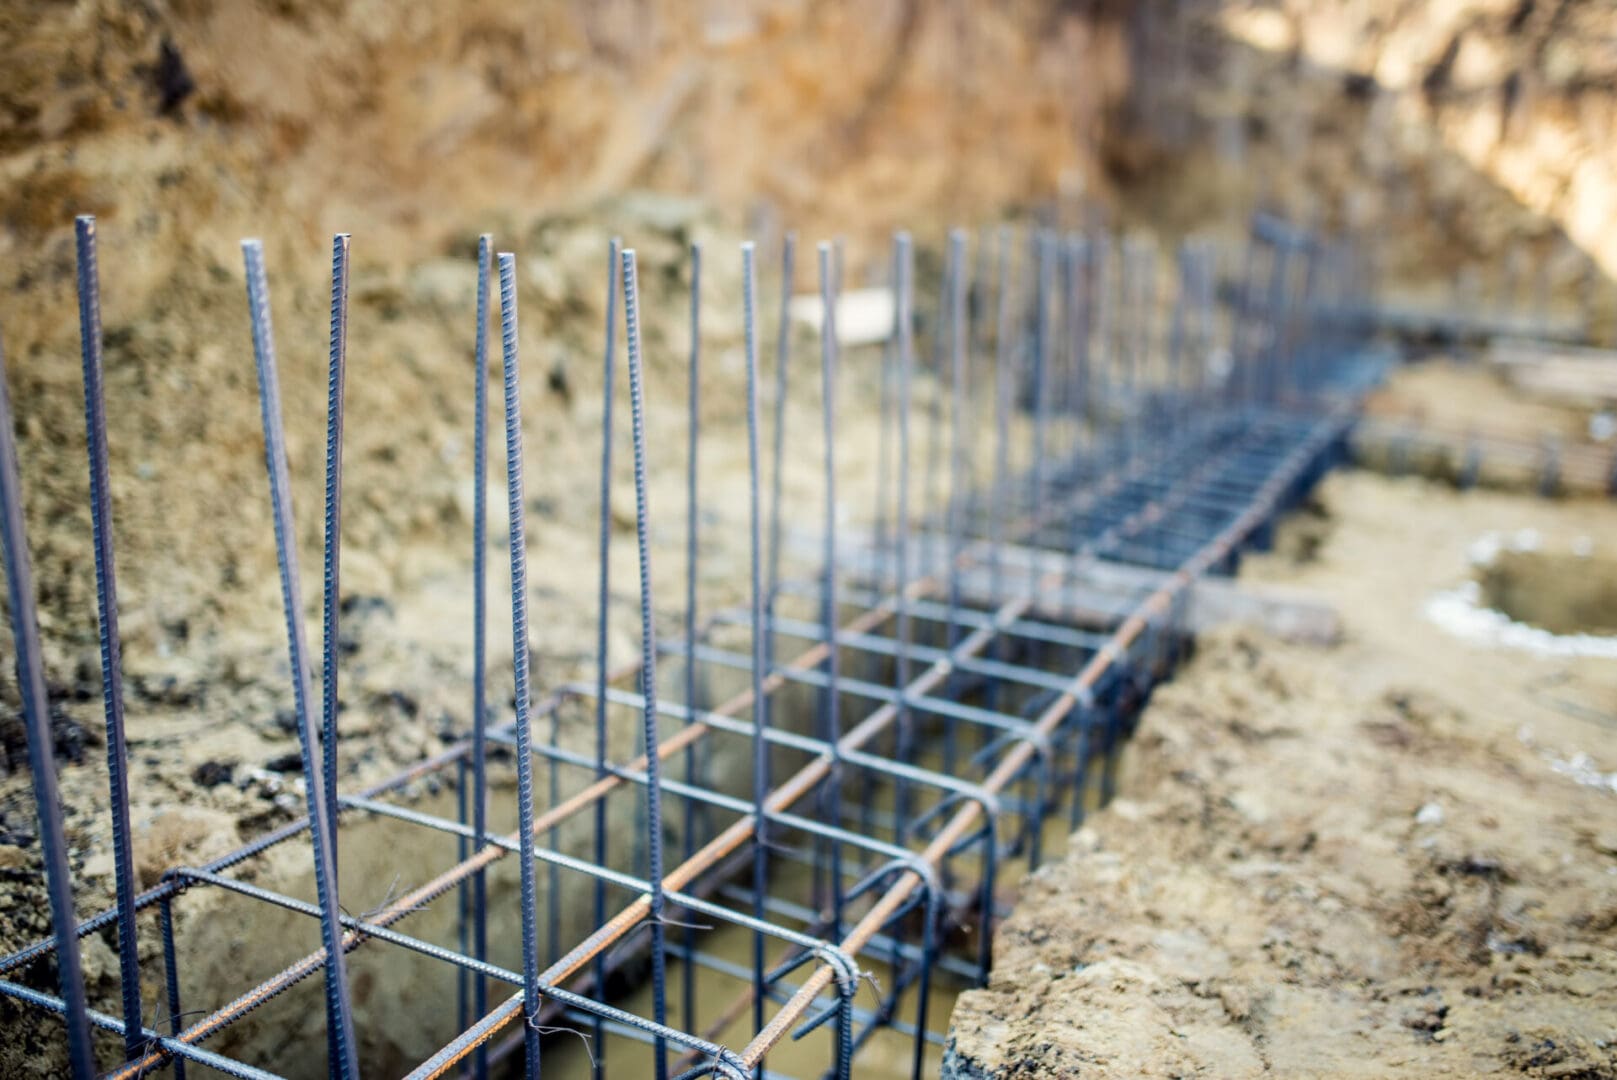 A close up of some metal rods in the ground